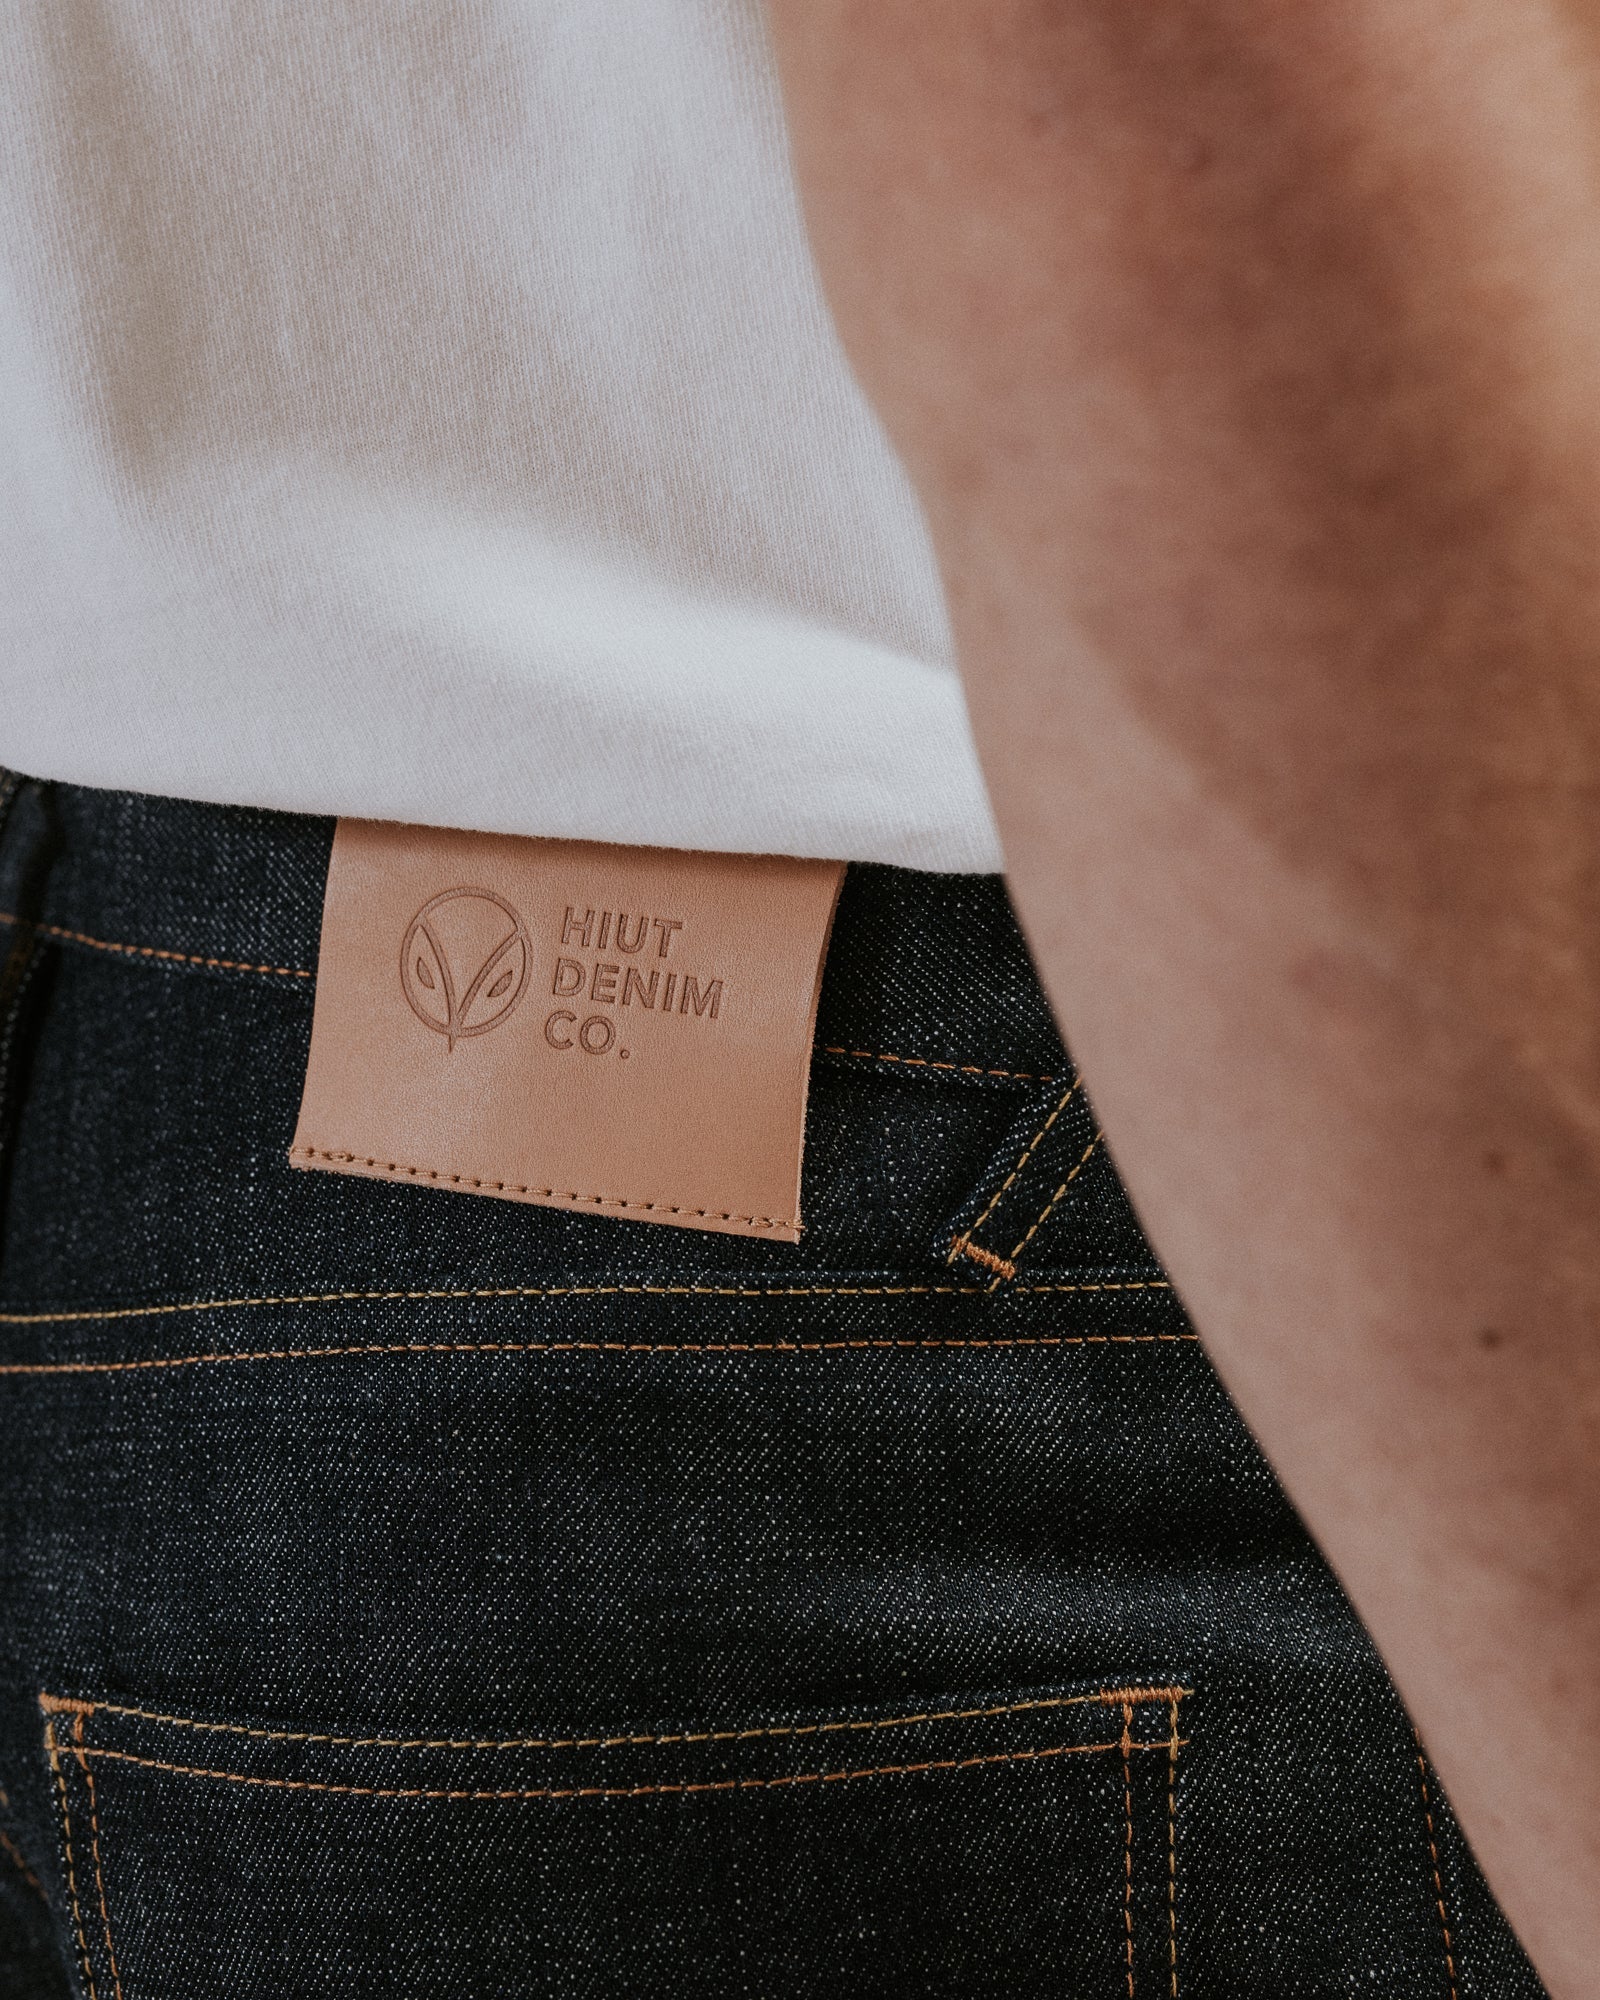 Hiut Denim Co. - Launched this week. The Girlfriend Jean. Shipping 1st  June. http://tinyurl.com/jzkdv6z | Facebook